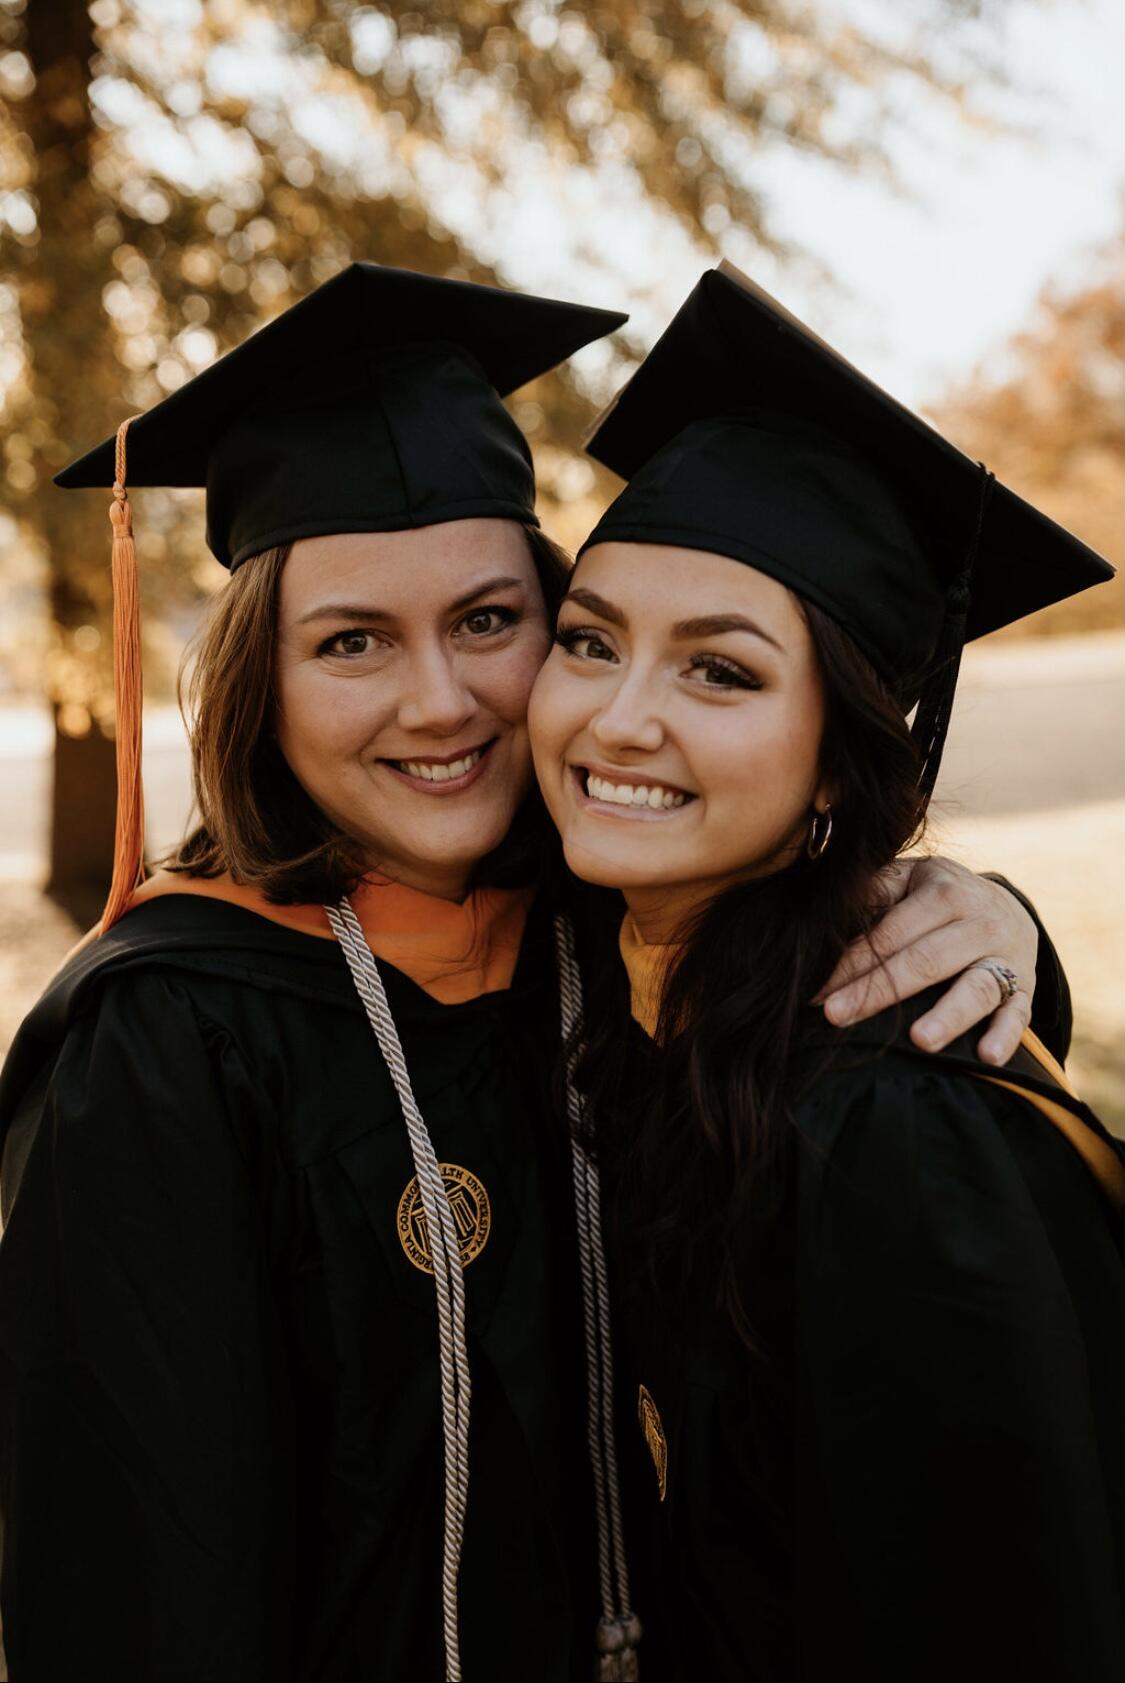 Two women wearing graduation cap and gowns